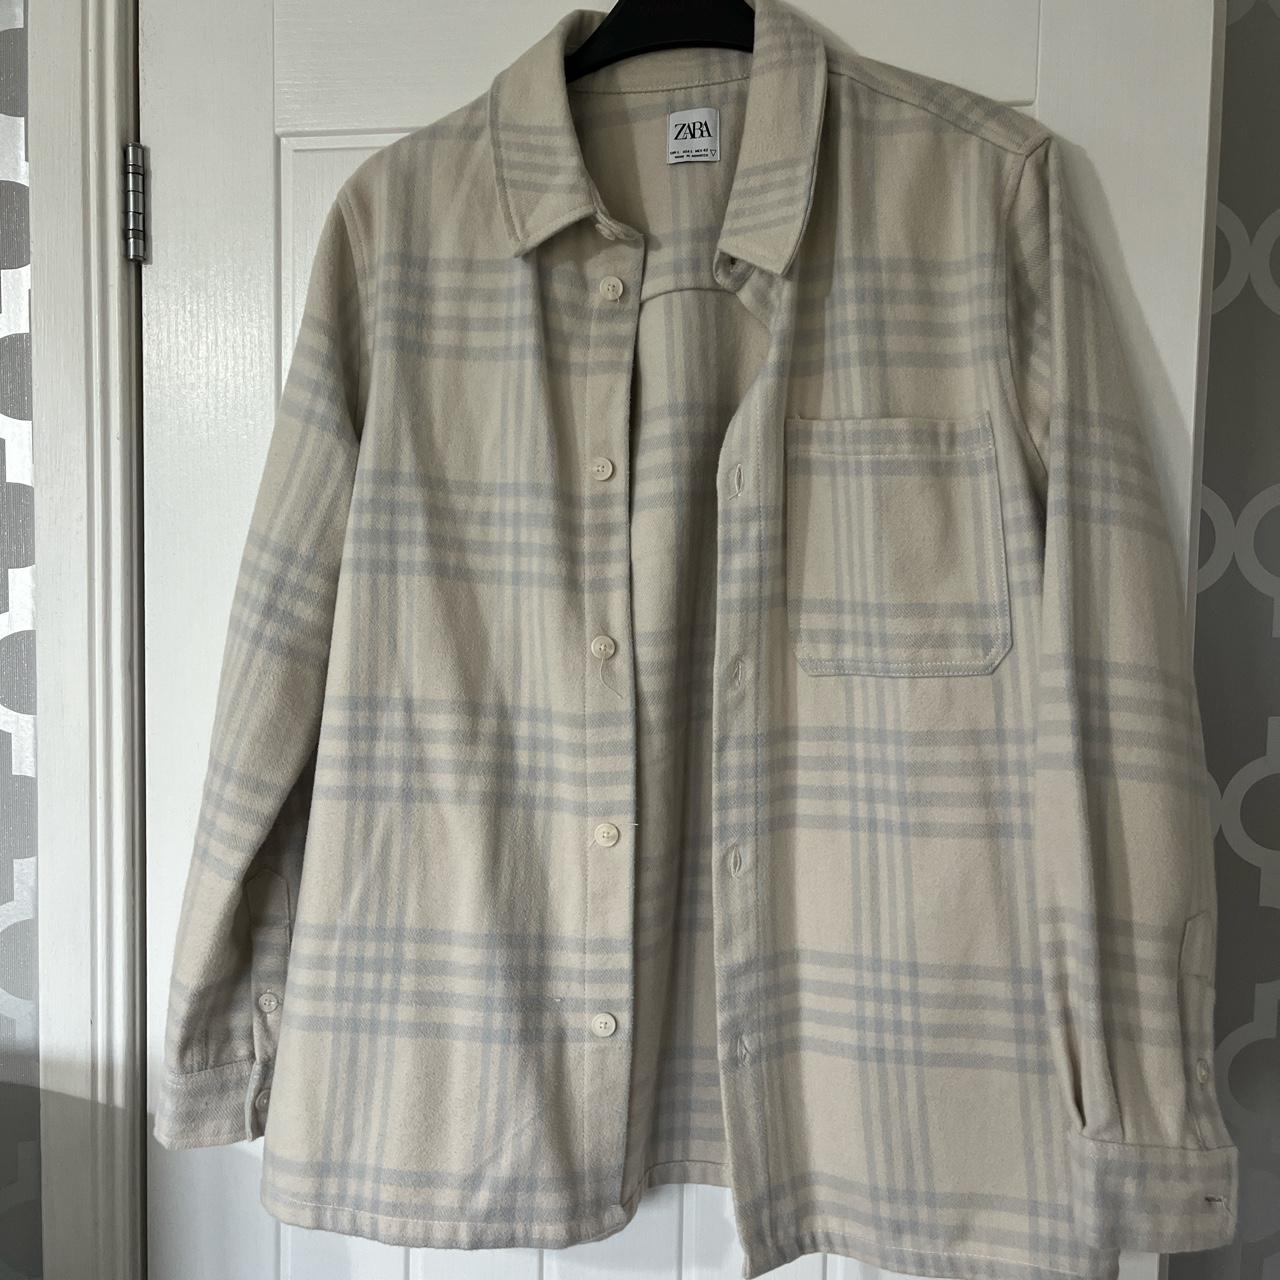 Zara flannel Overshirt . Only worn once and in... - Depop